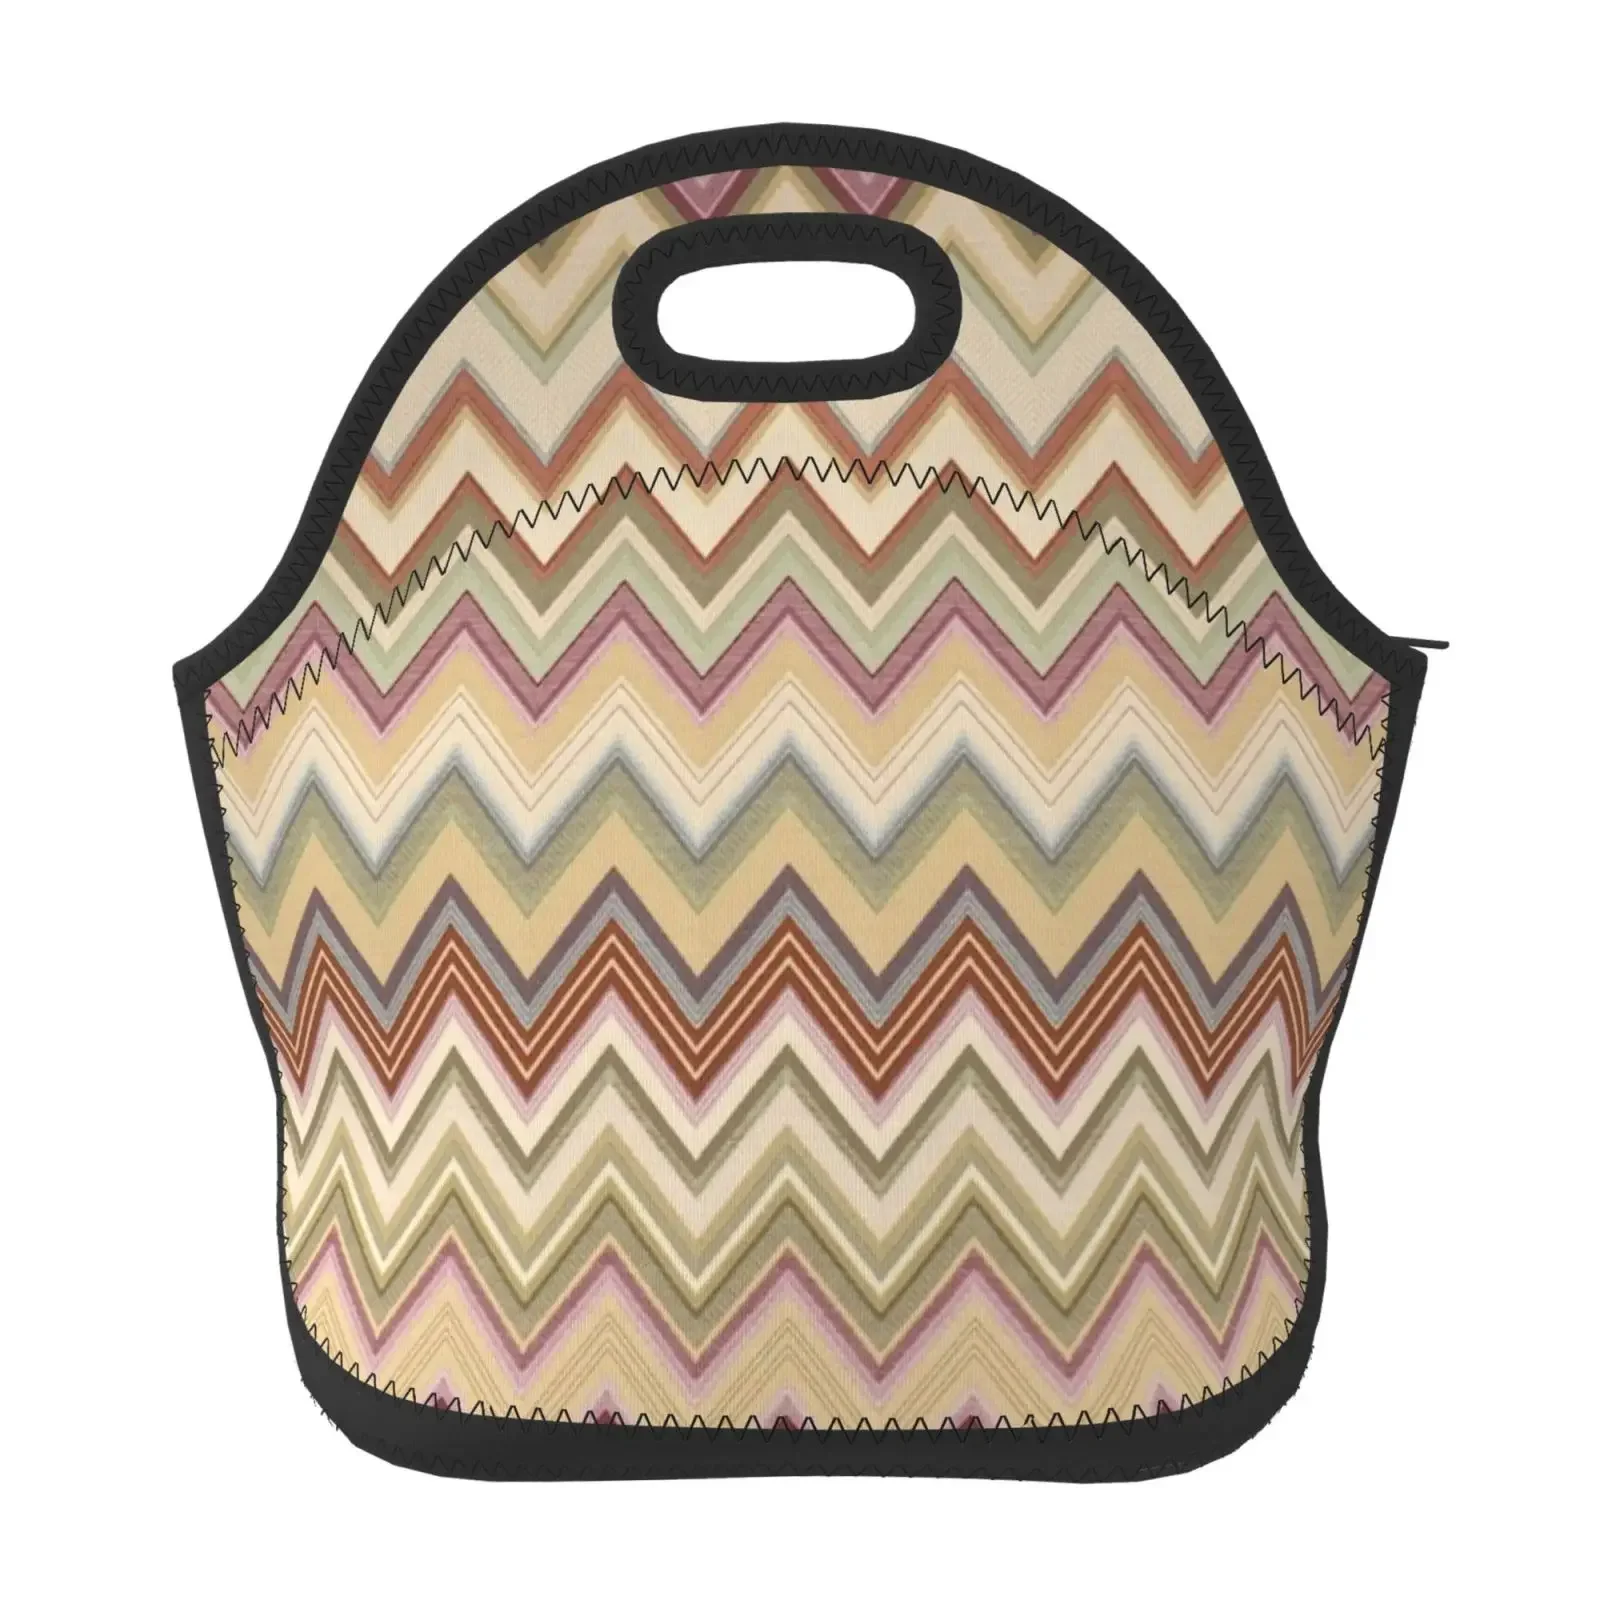 

Zigzag Lines,Soft Neoprene Lunch Tote Bag Tribal Zigzag Lightweight,Insulated and Reusable for Work/School/Travel/Picnic